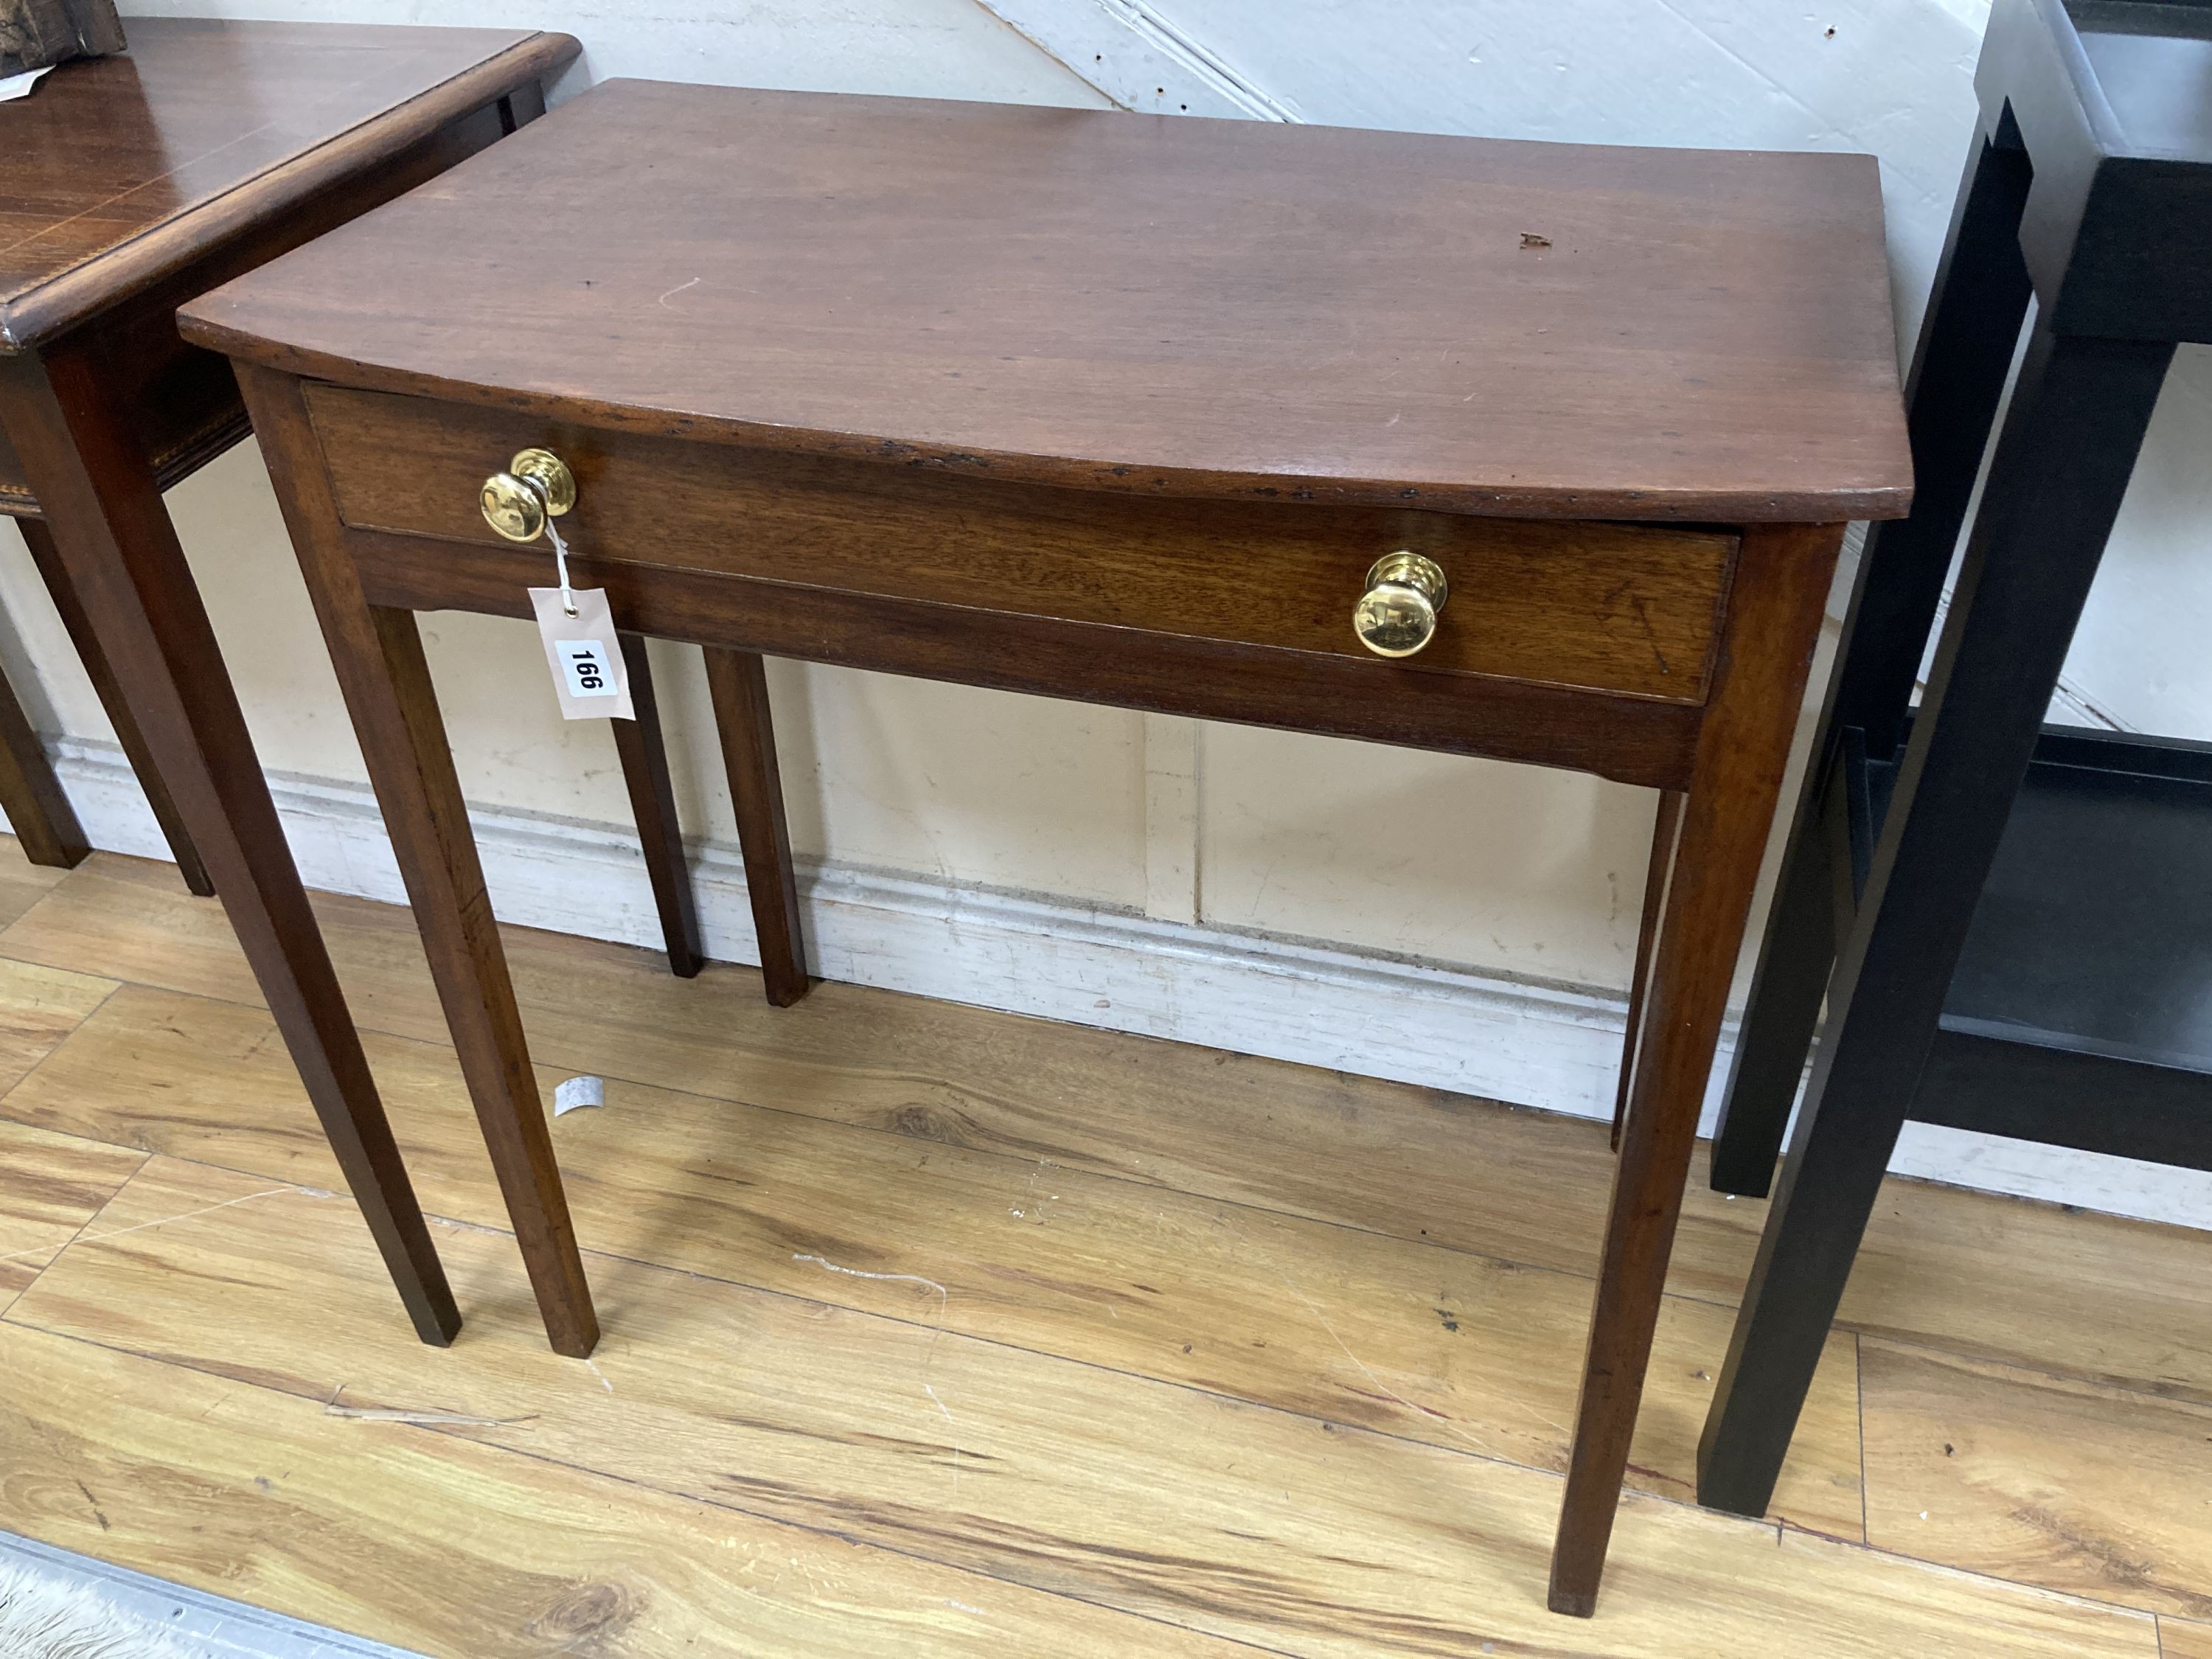 A George III mahogany bow front side table. W-72, D-43, H-71cm.